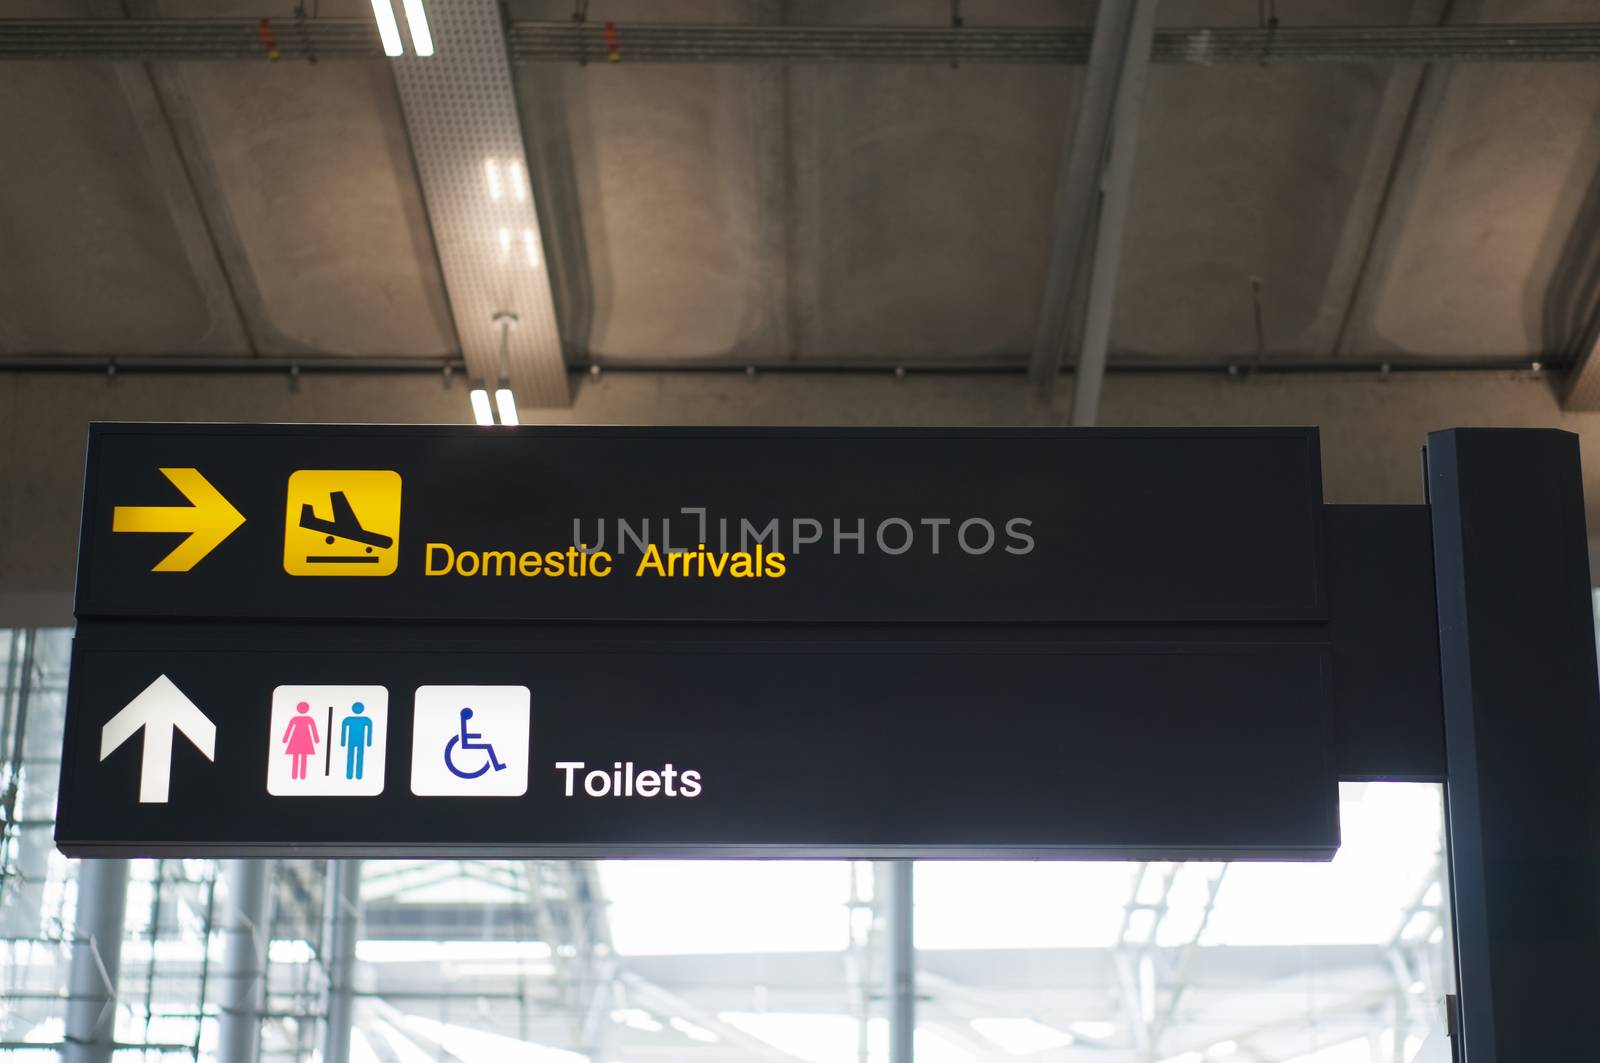 Domestic arrivals and toilets board sign at international airport by eaglesky